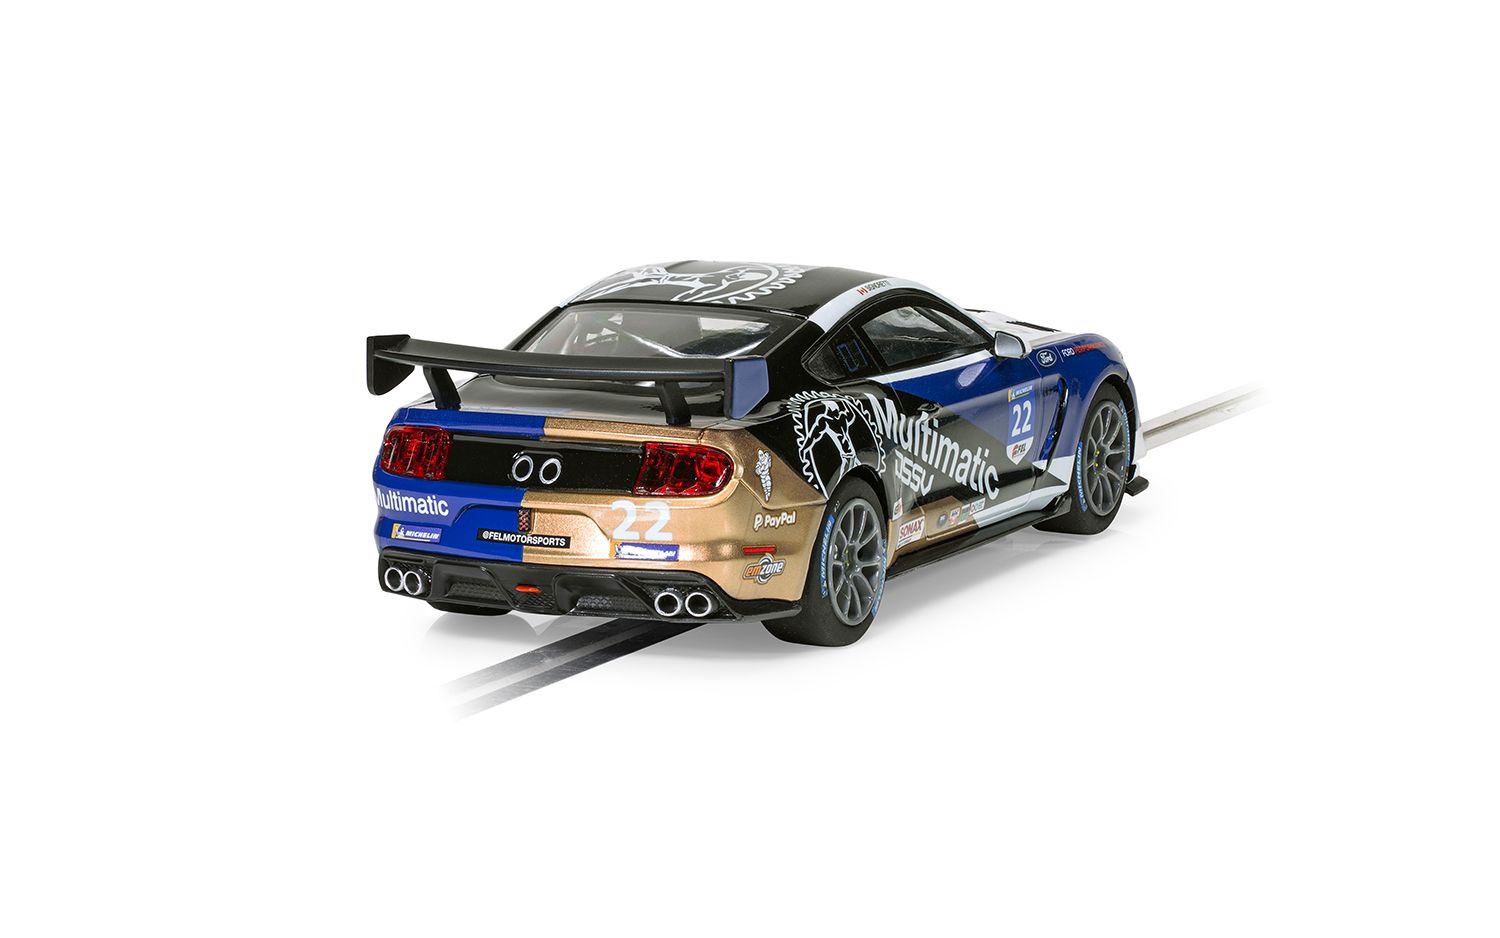 C4403 Ford Mustang GT4 - Canadian GT 2021 - Multimatic Motorsport